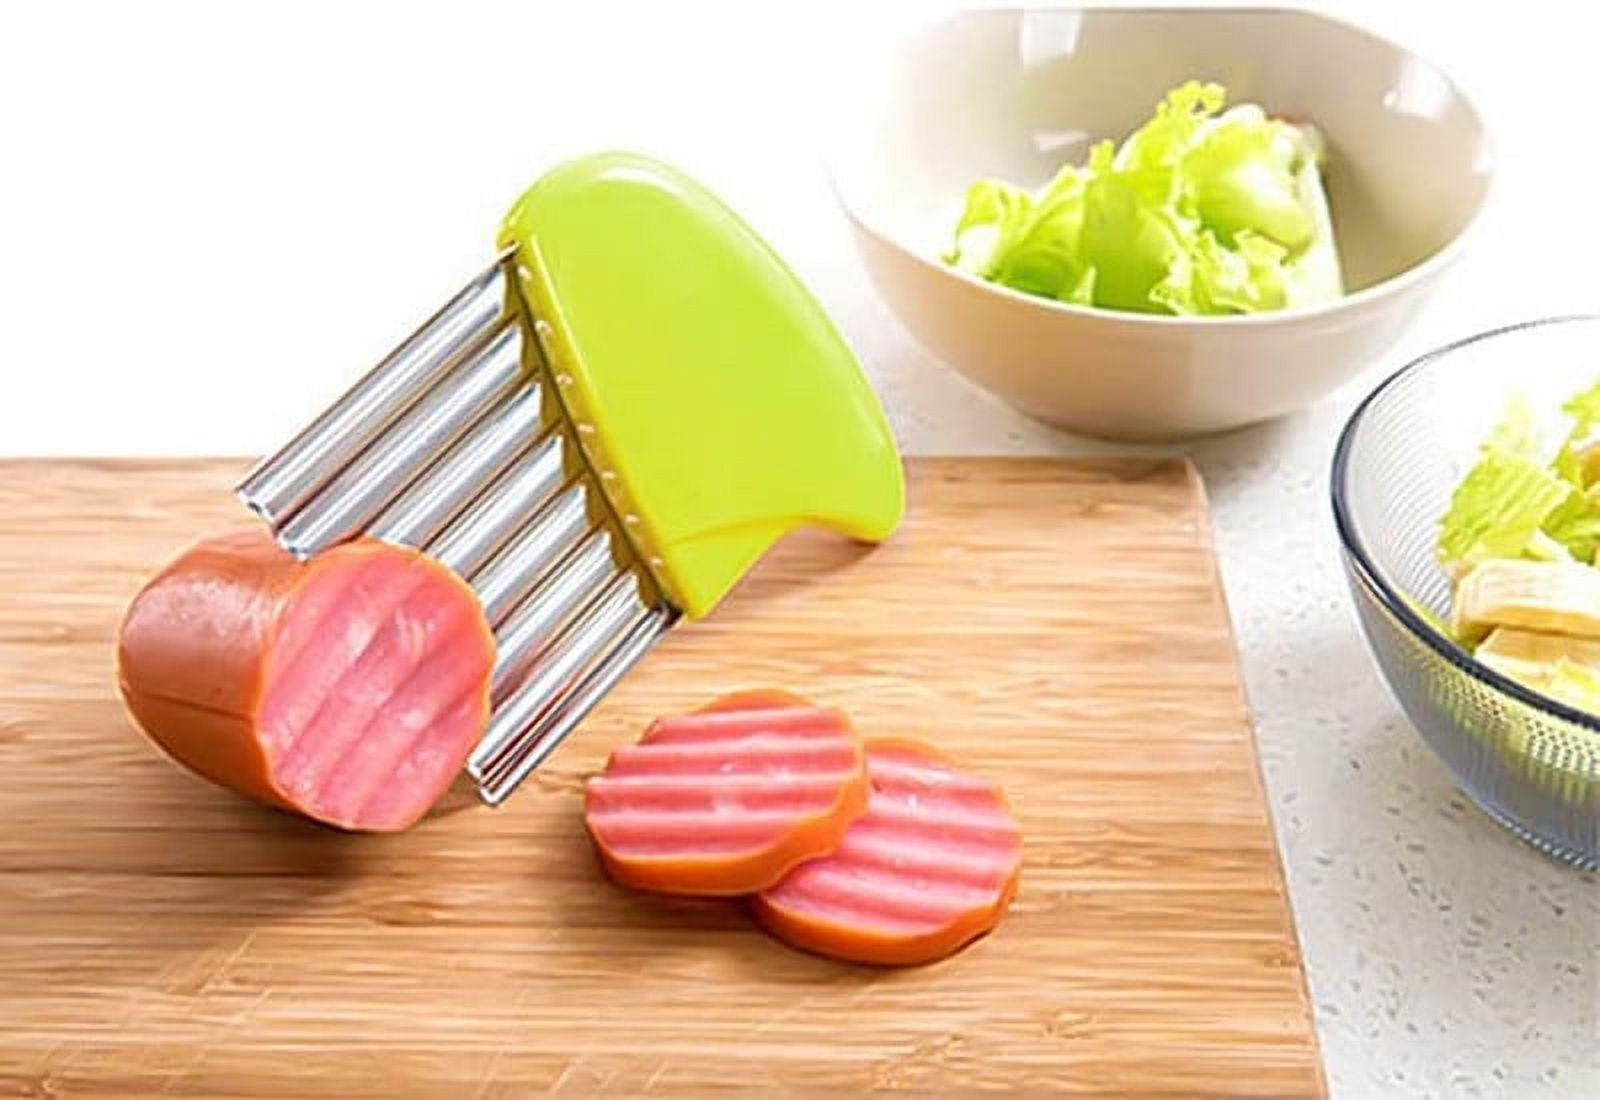 Stainless Steel Wavy Soap Cutter for Wavy Edges - MakeYourOwn